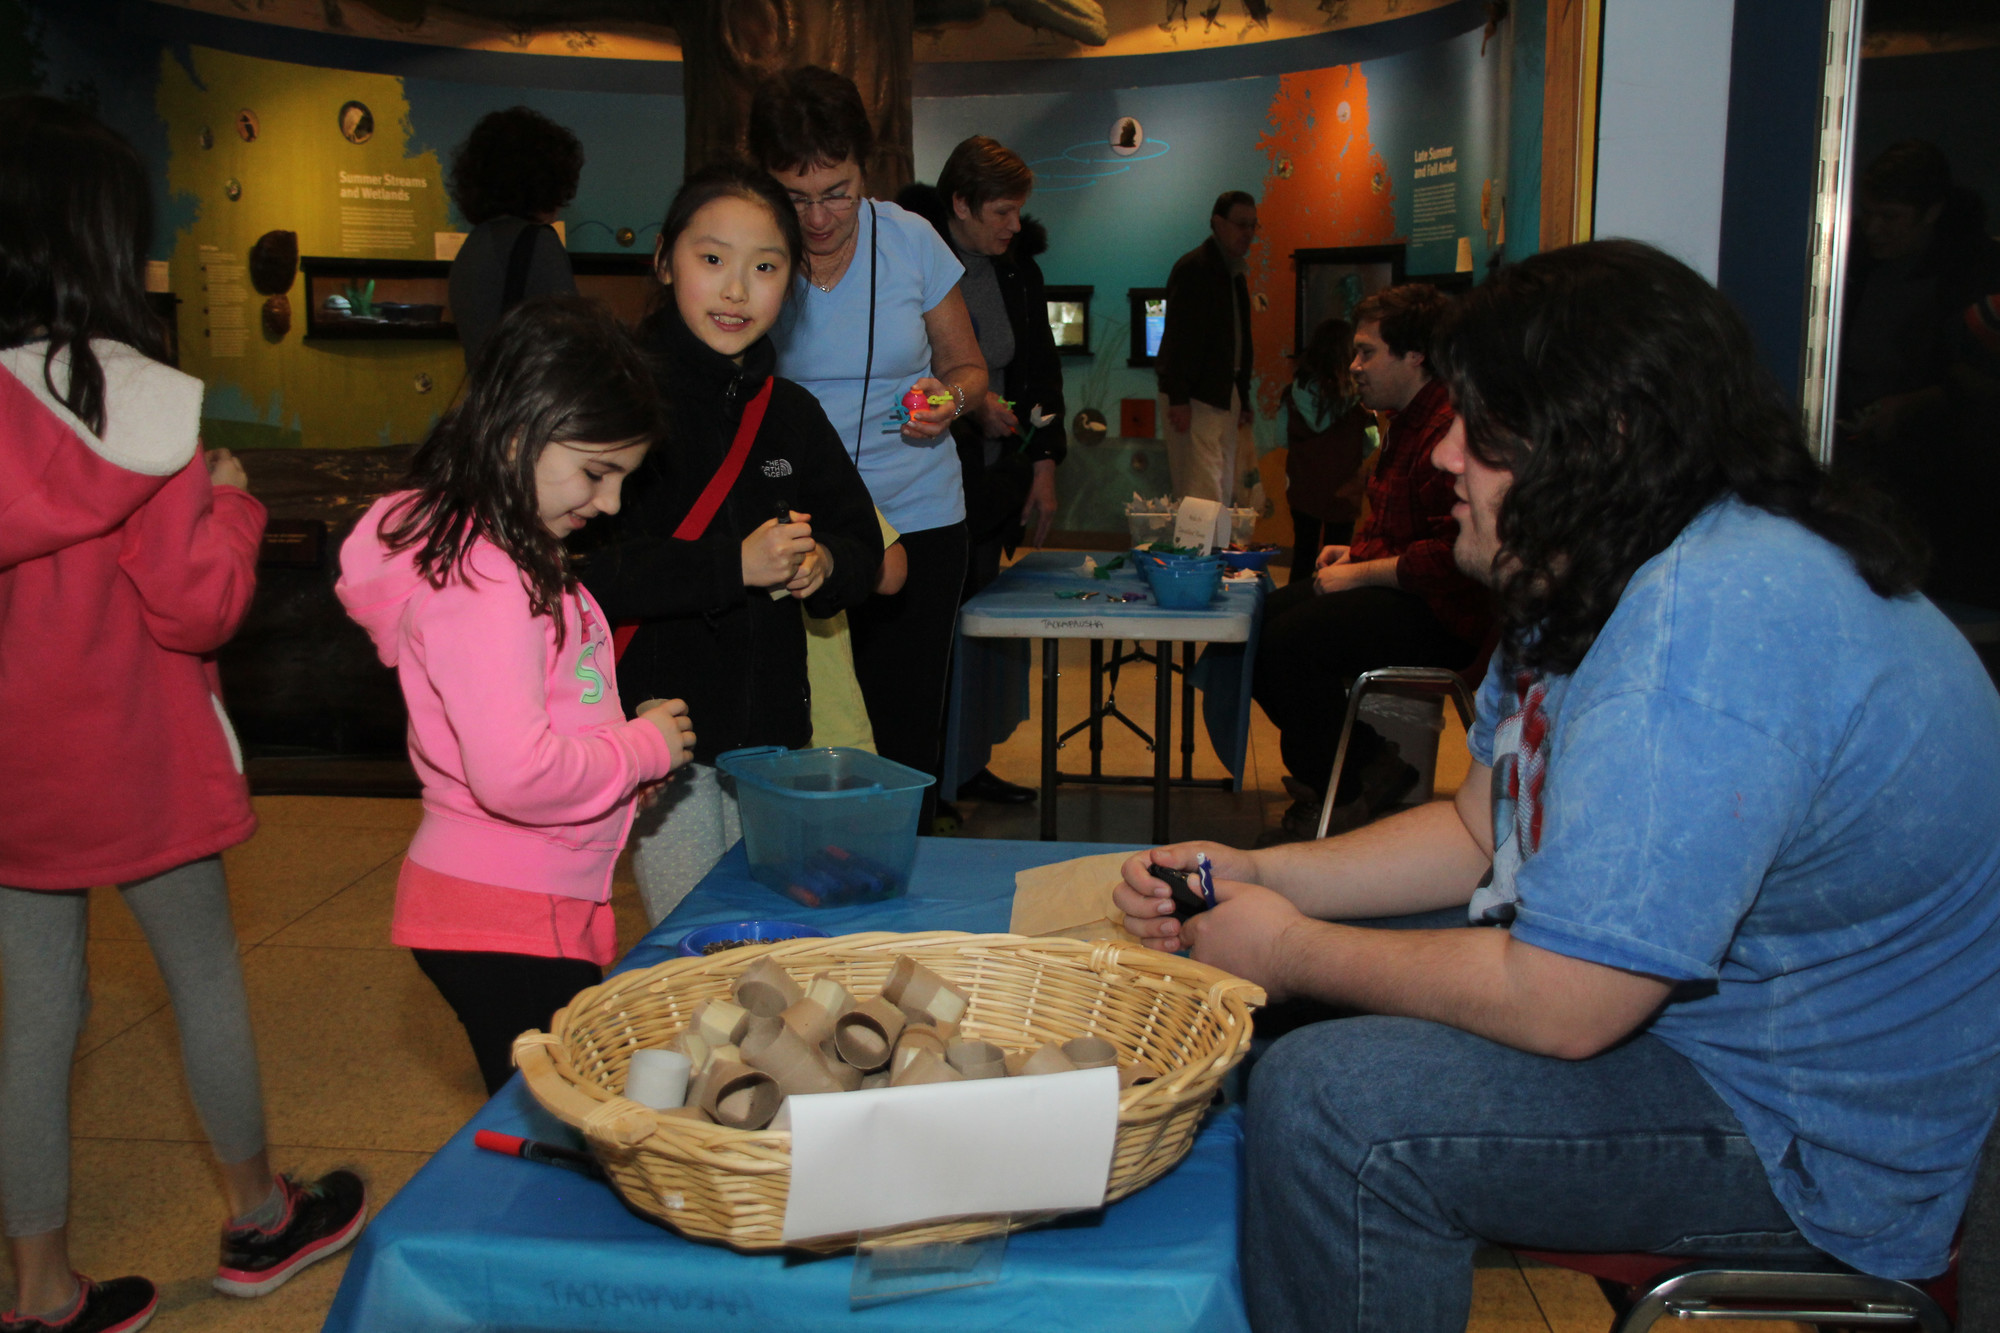 Volunteer Brian 
Boden explained how to 
prepare a sunflower seedling for planting to Rachel Woo, 9, and Saia Kalash, 8.